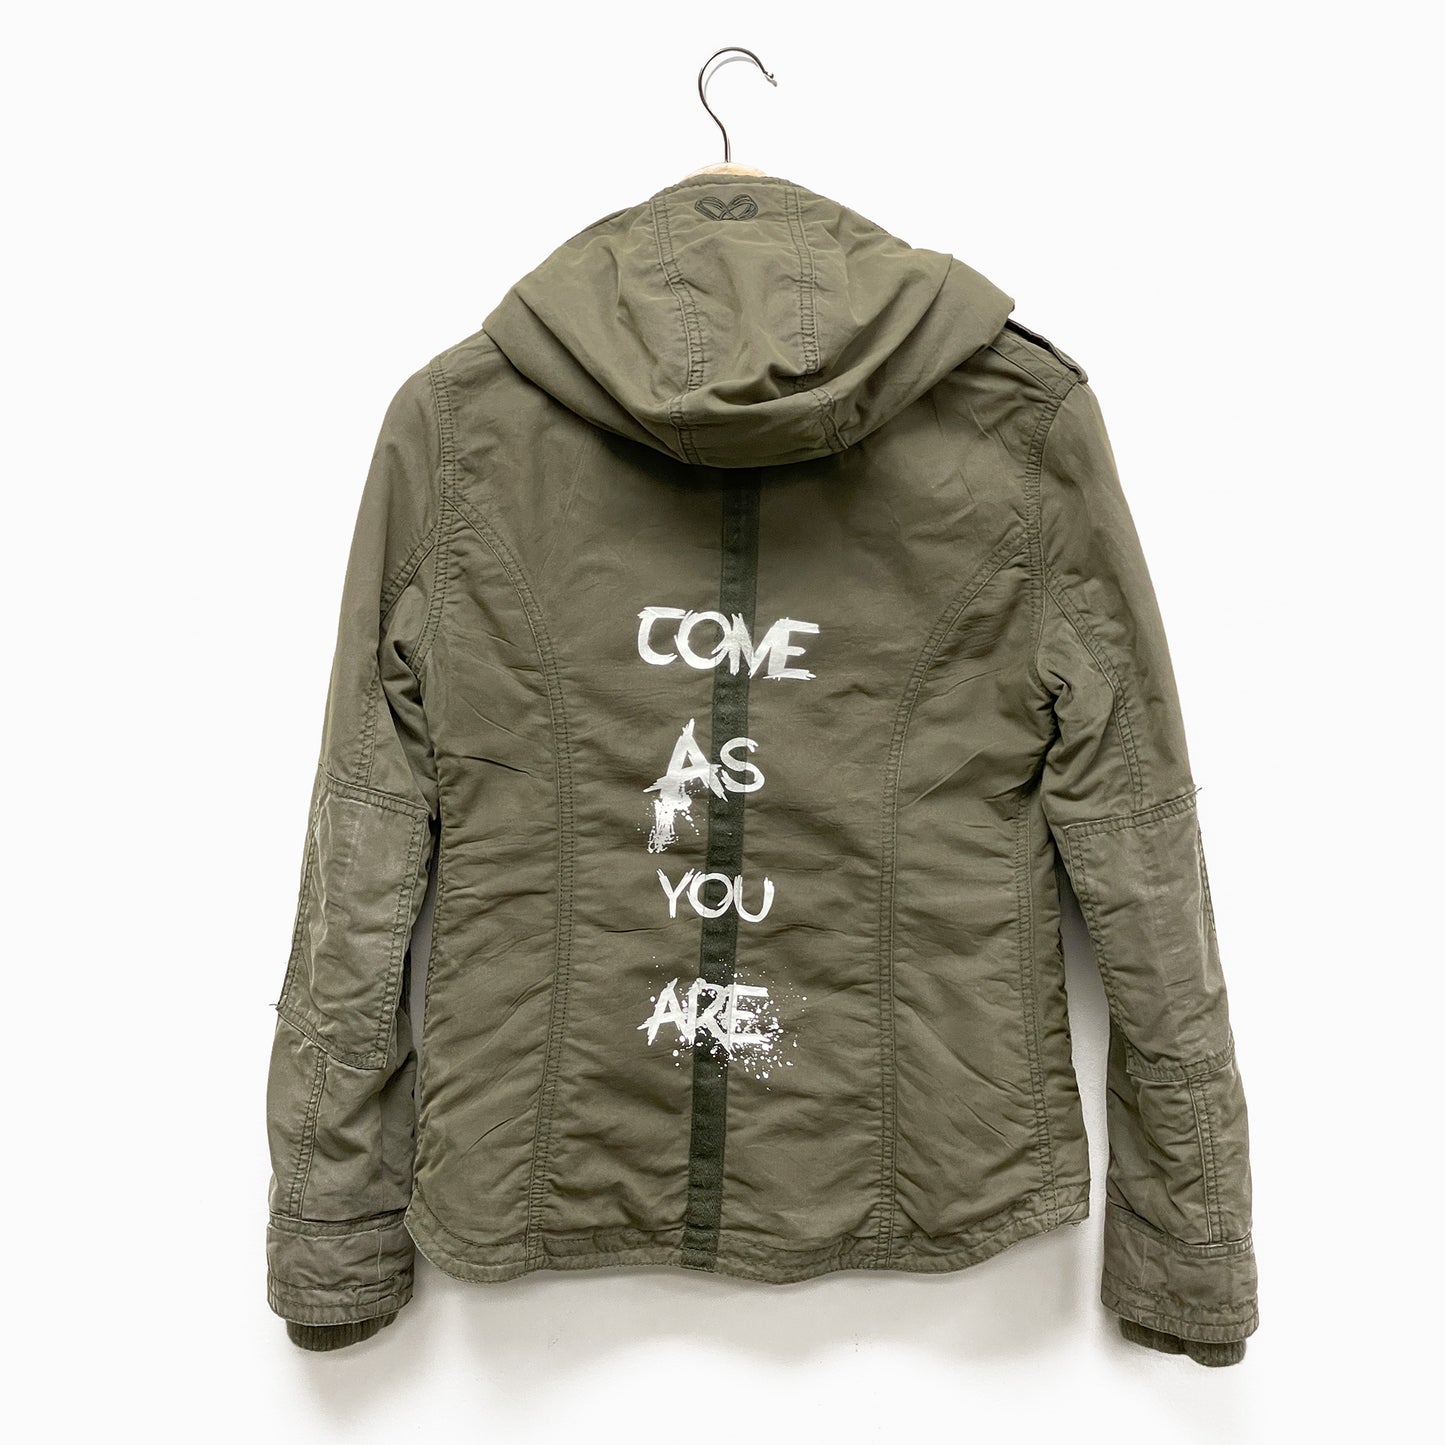 Upcycled Vintage Jacket "Come As You Are"